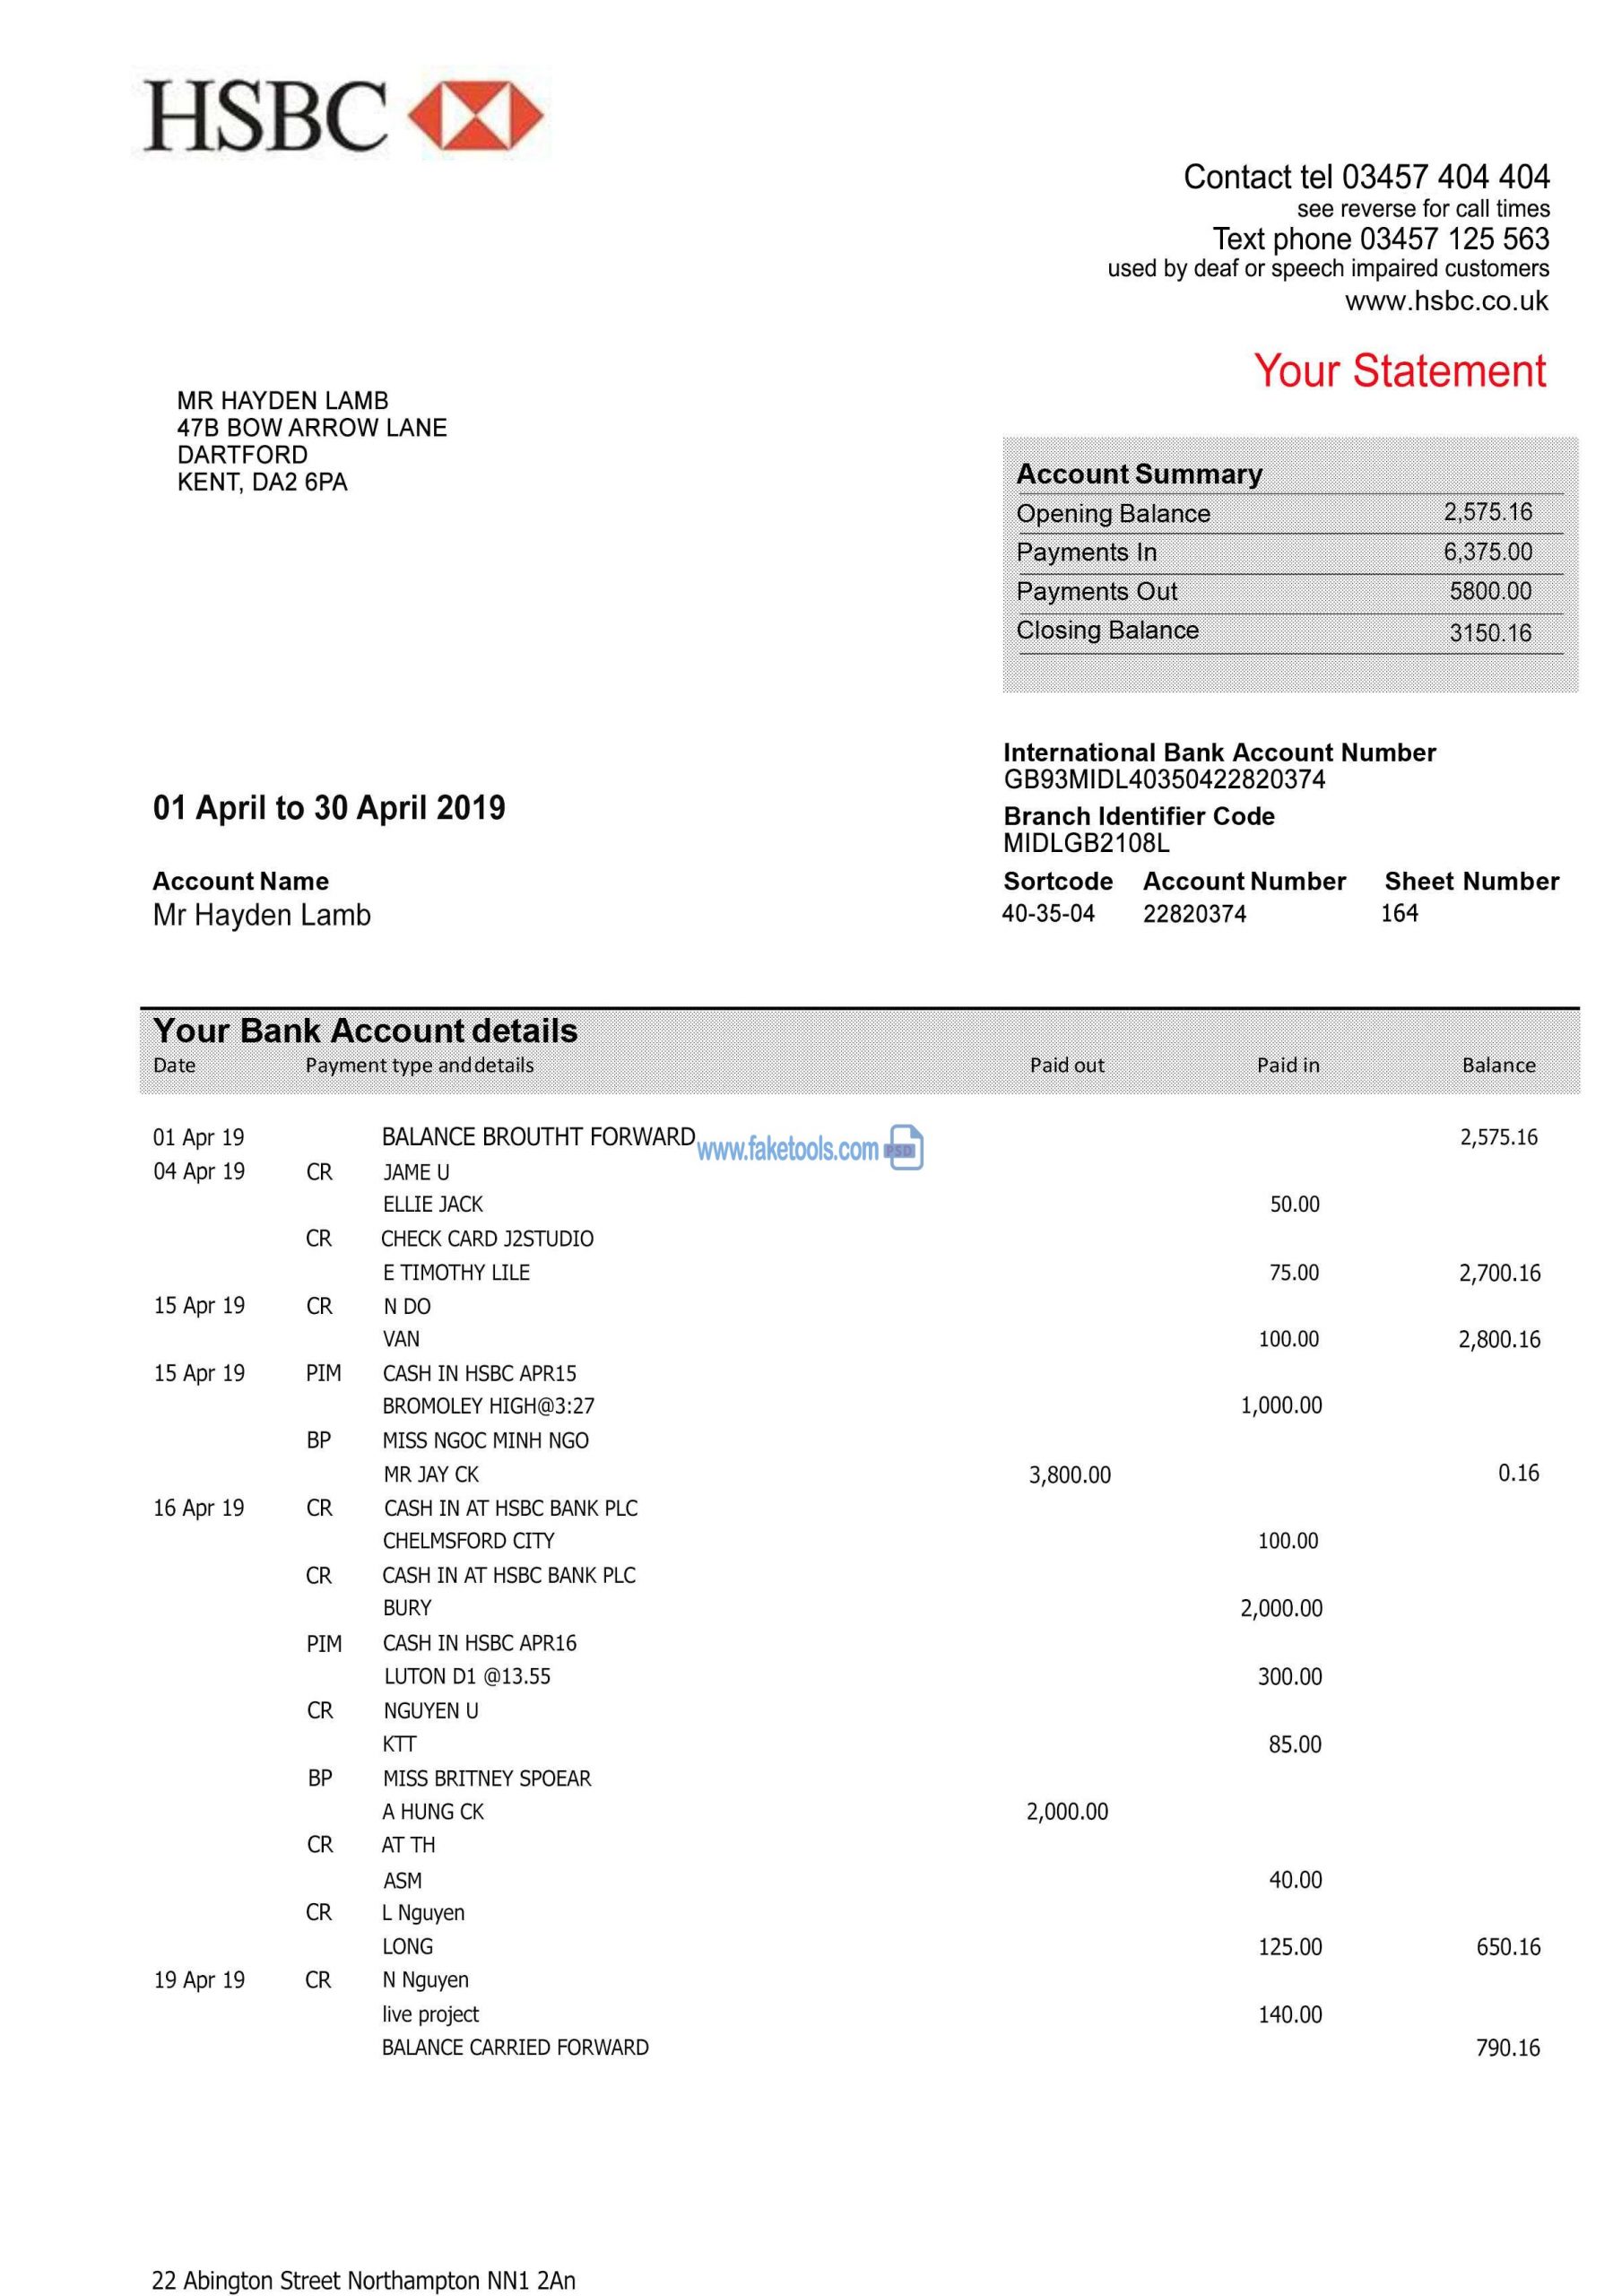 HSBC bank Statement psd template  Amazing Tools For Blank Bank Statement Template Download